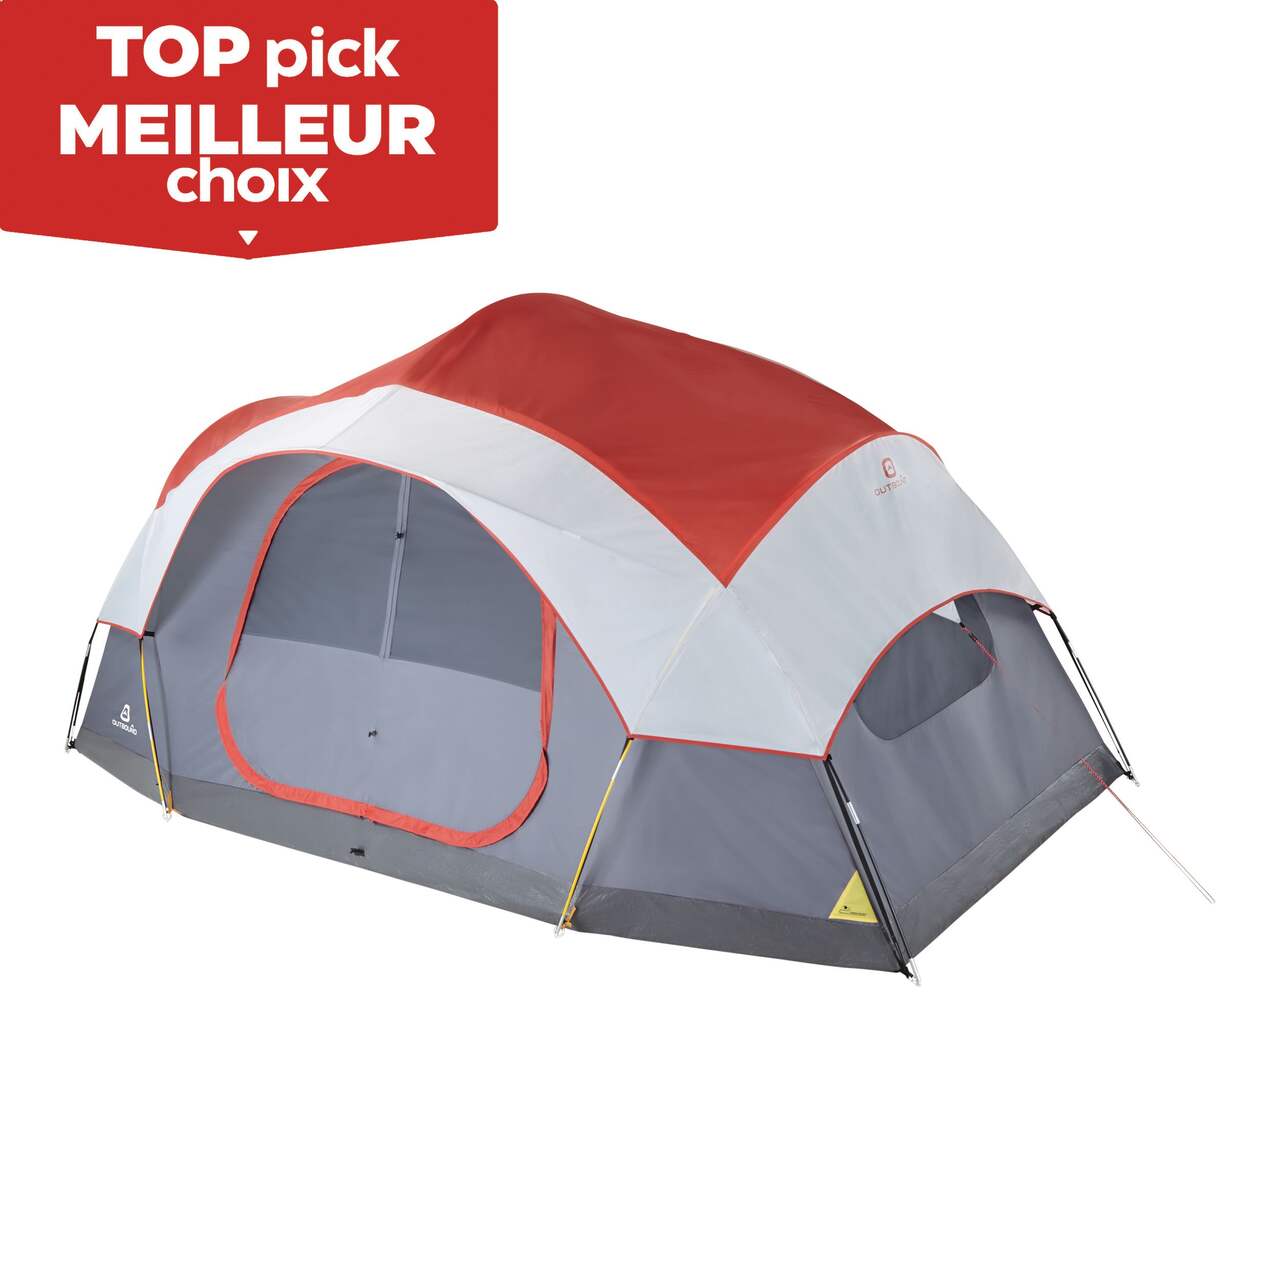 Outbound 3-Season, 8-Person, 2-Room Camping Dome Tent w/ Room Divider, Rain  Fly & Carry Bag